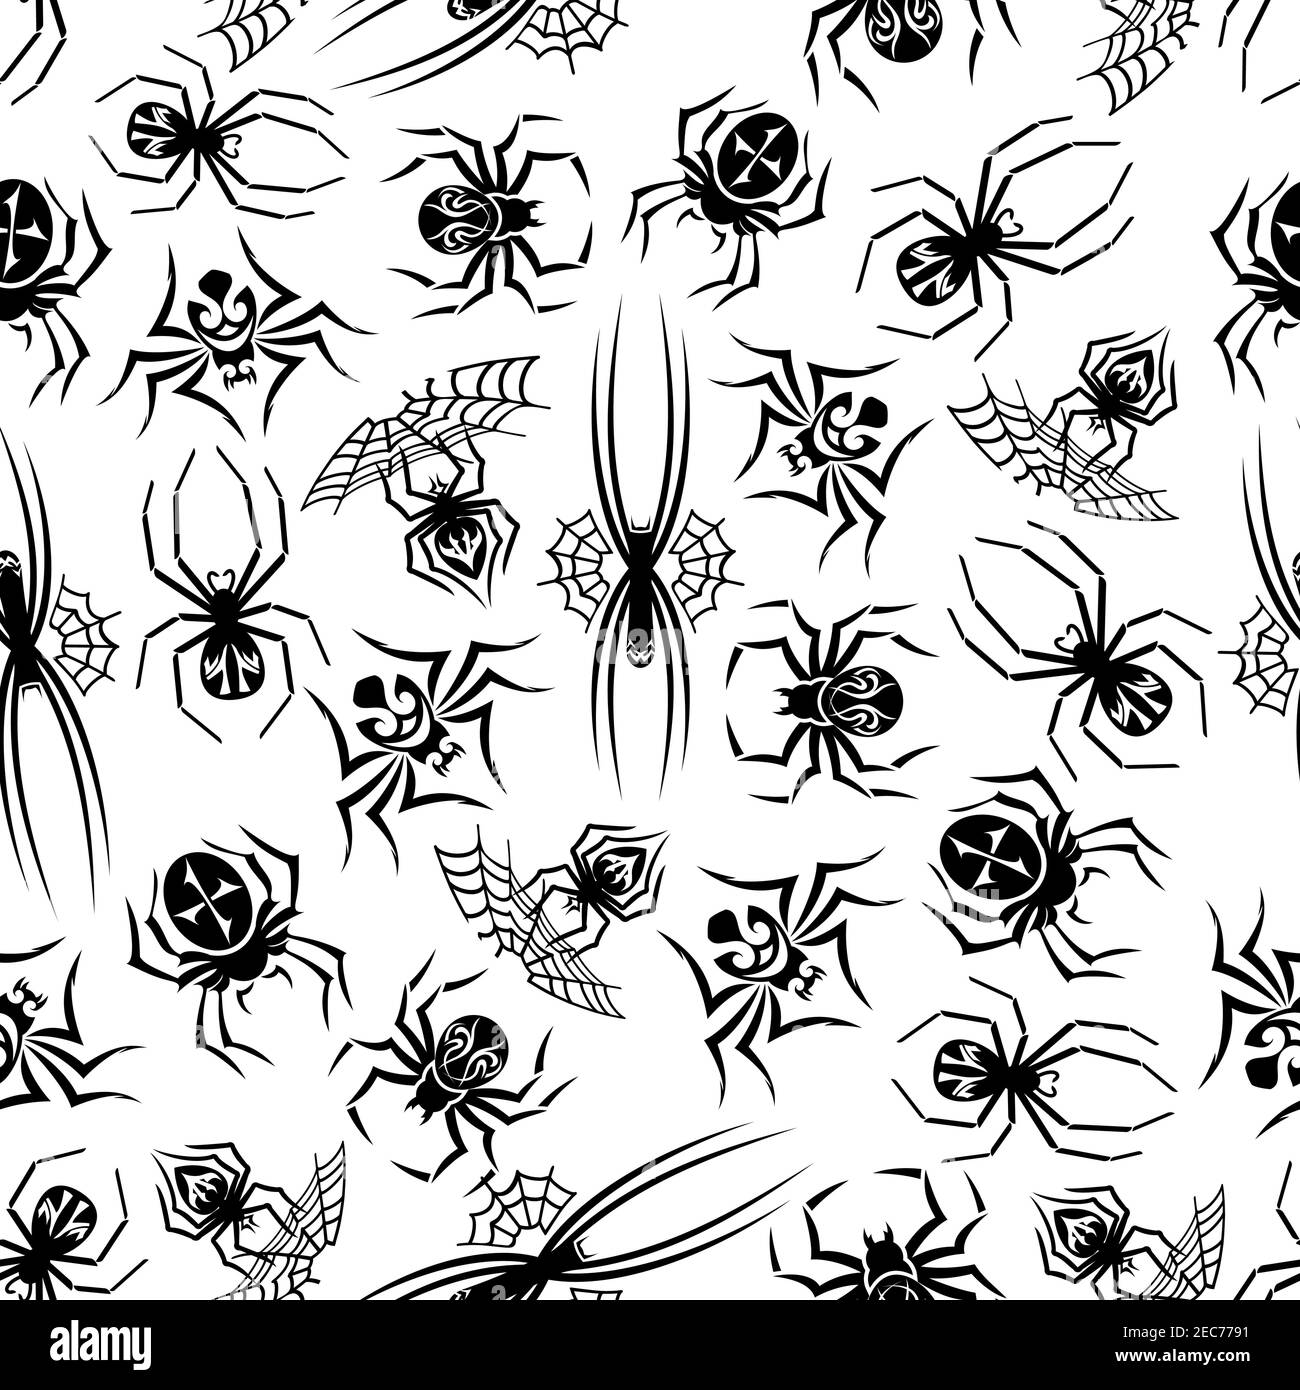 Black spiders seamless background. Wallpaper with vector pattern icons of tarantula, spider web. Halloween decoration Stock Vector